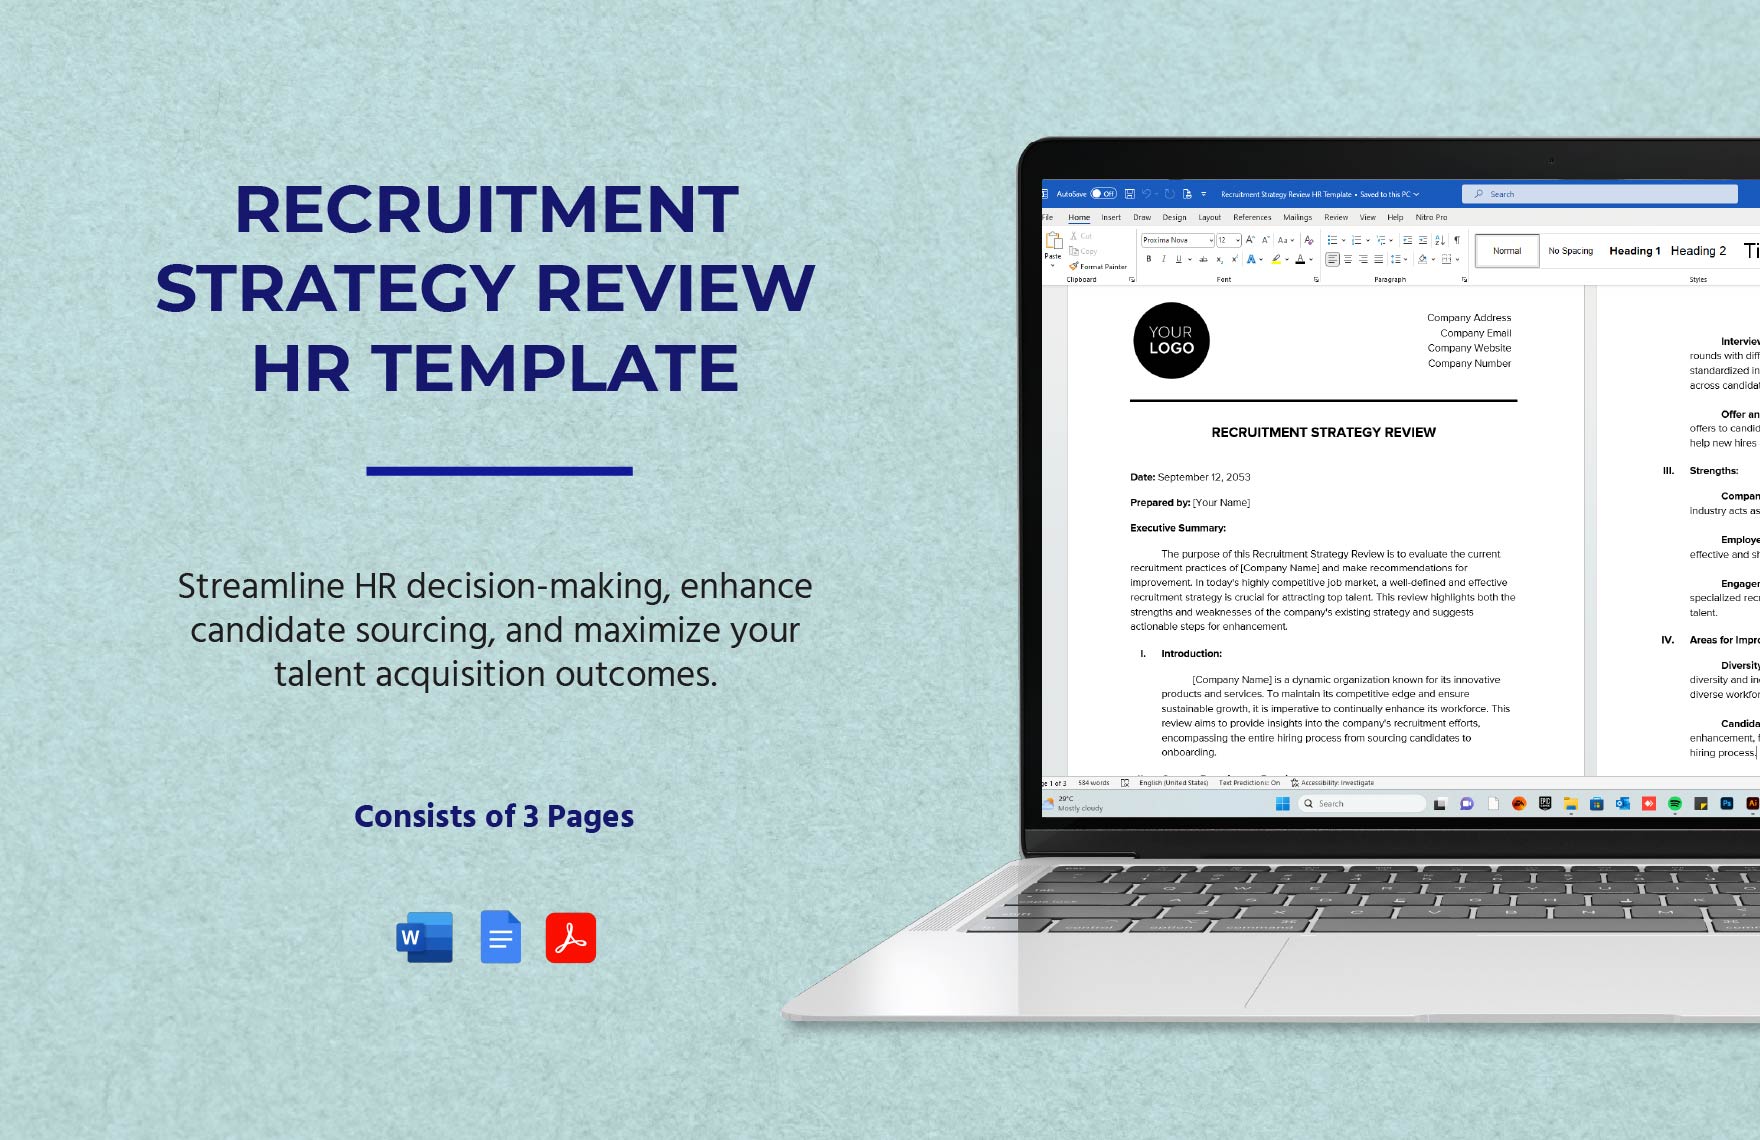 Recruitment Strategy Review HR Template in Word, Google Docs, PDF